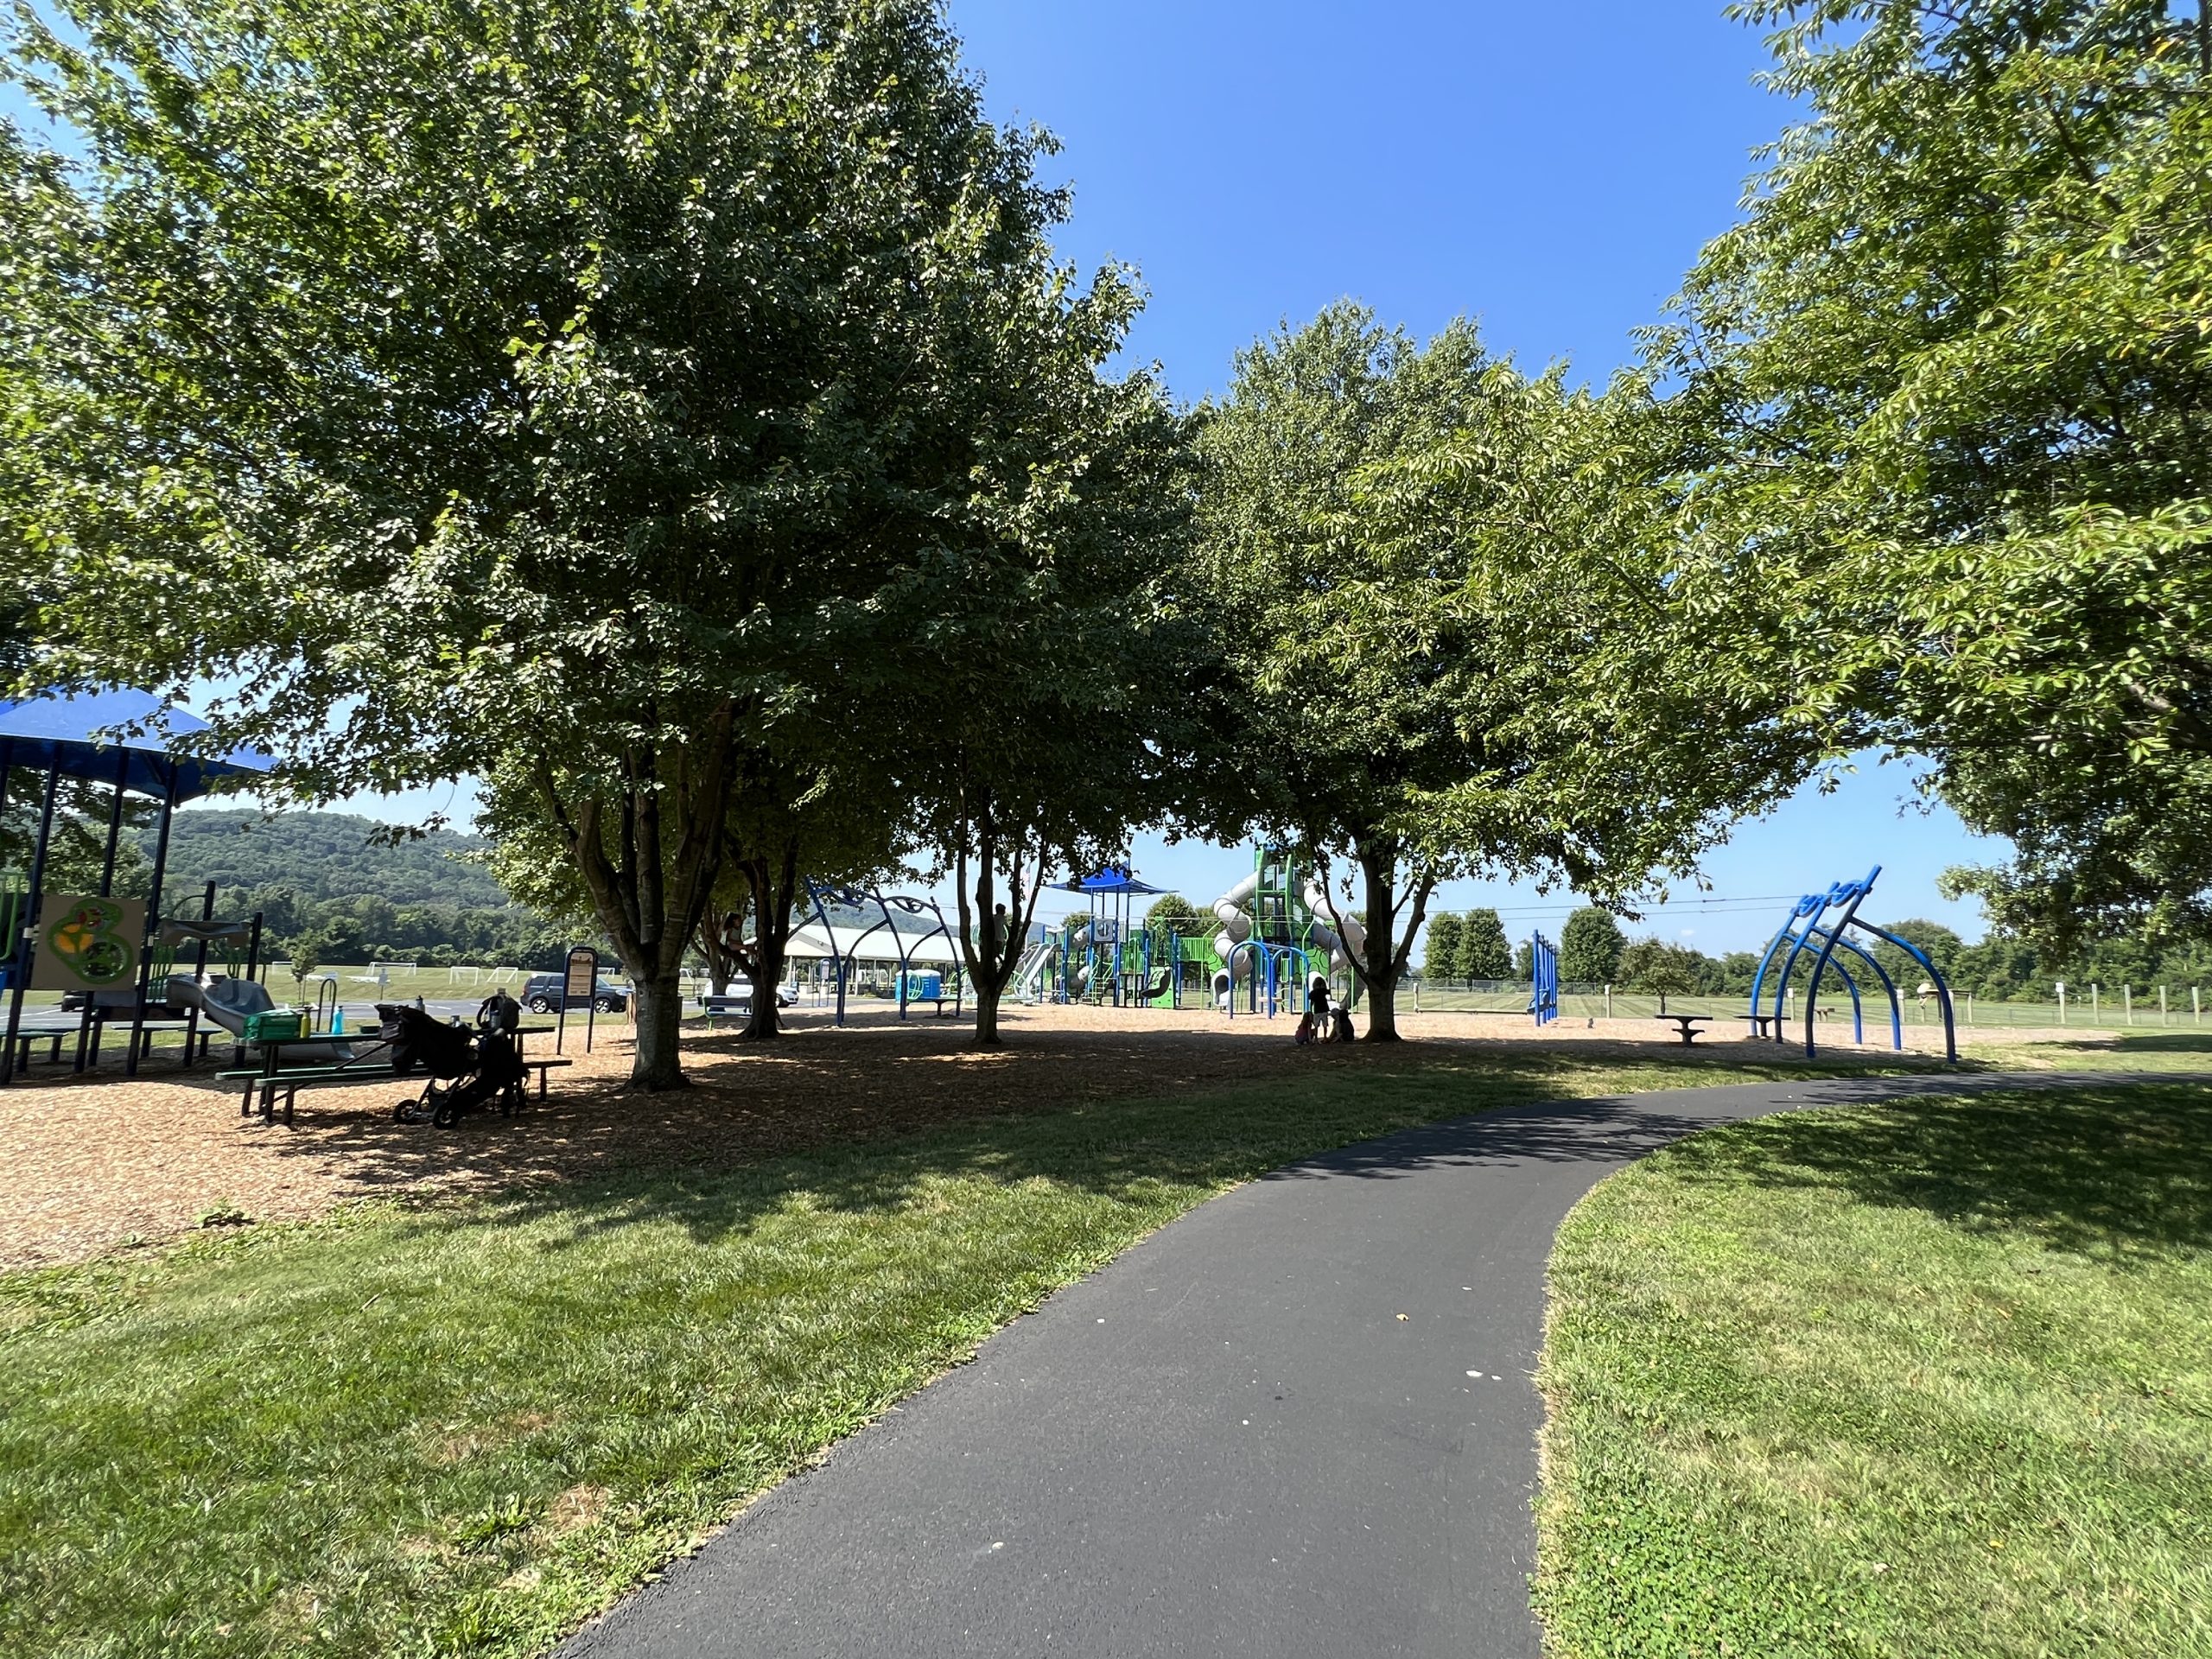 Heritage Park in Asbury NJ - EXTRA - Walking Path to playground WIDE - SHADY